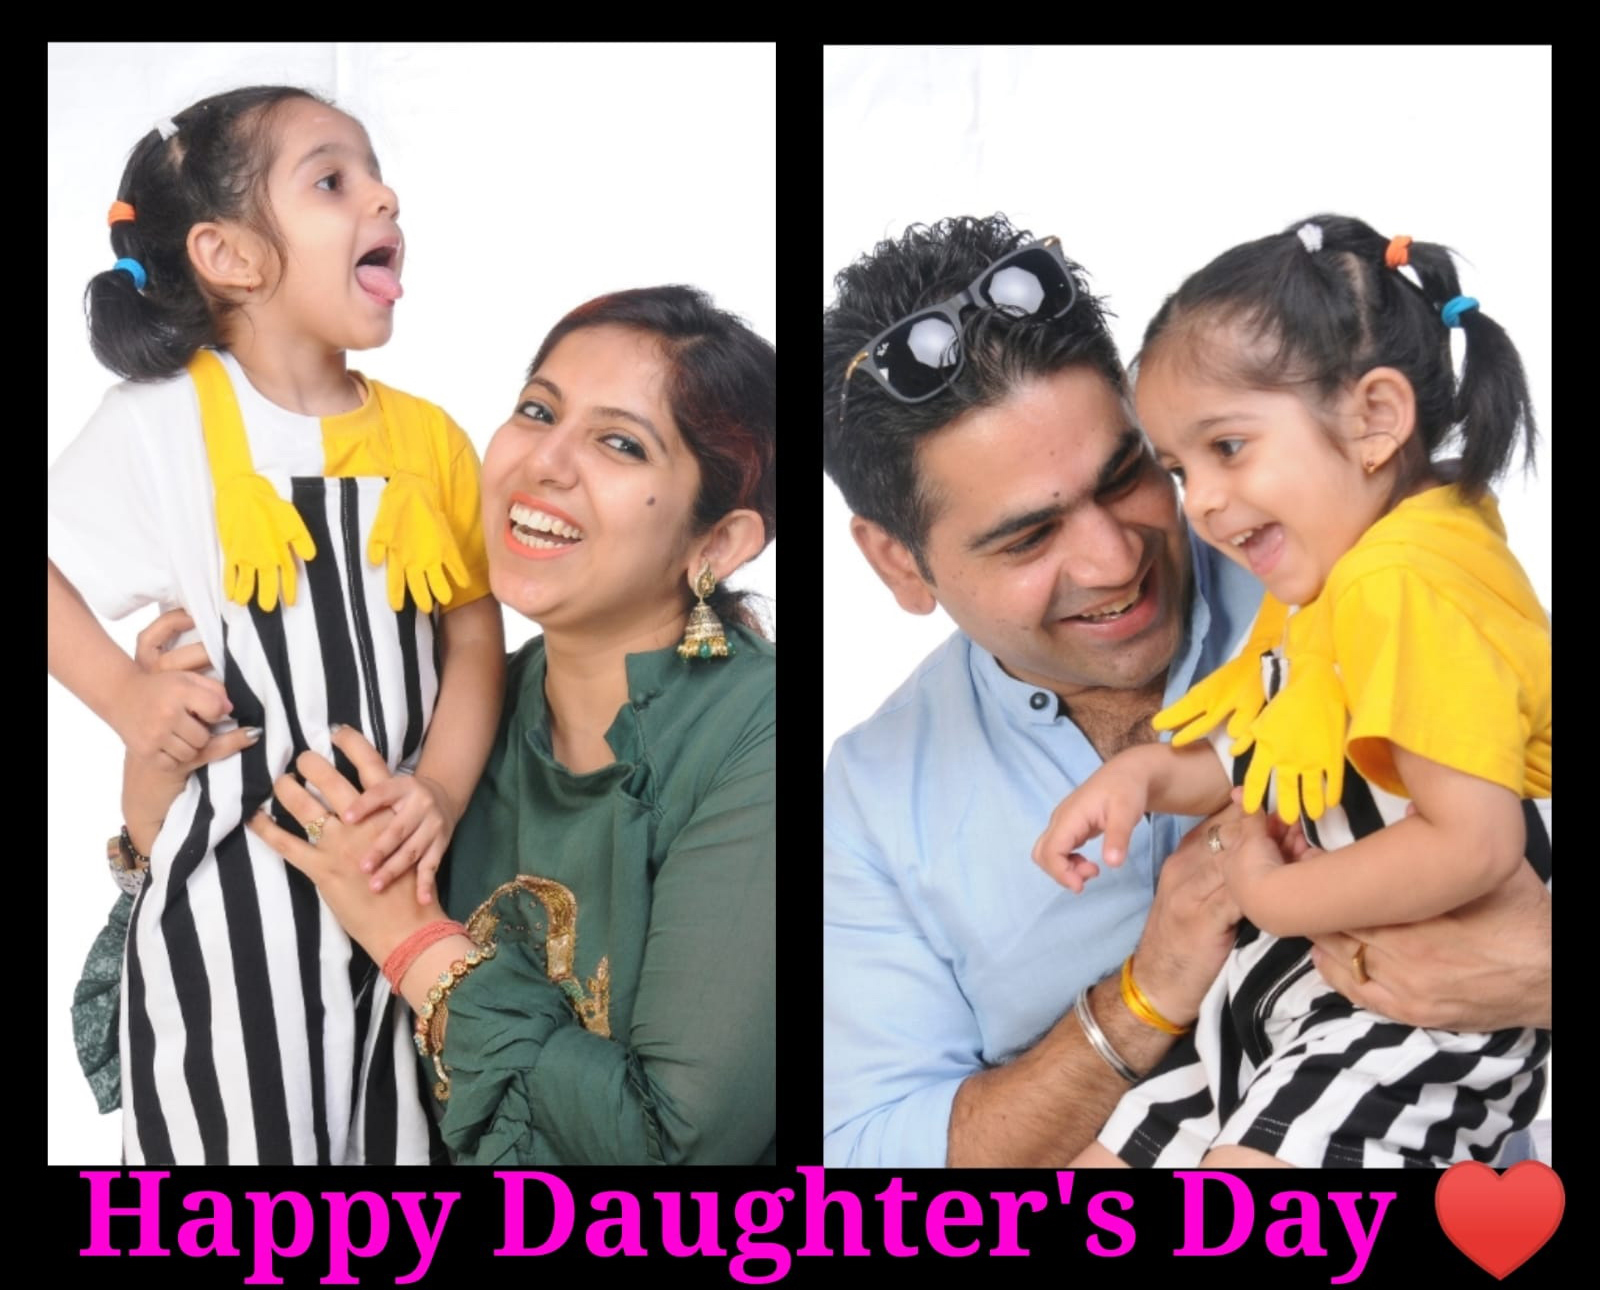 Presidium Rajnagar, NATIONAL DAUGHTER’S DAY:WHERE THERE’S DAUGHTER, THERE’S ECSTASY!